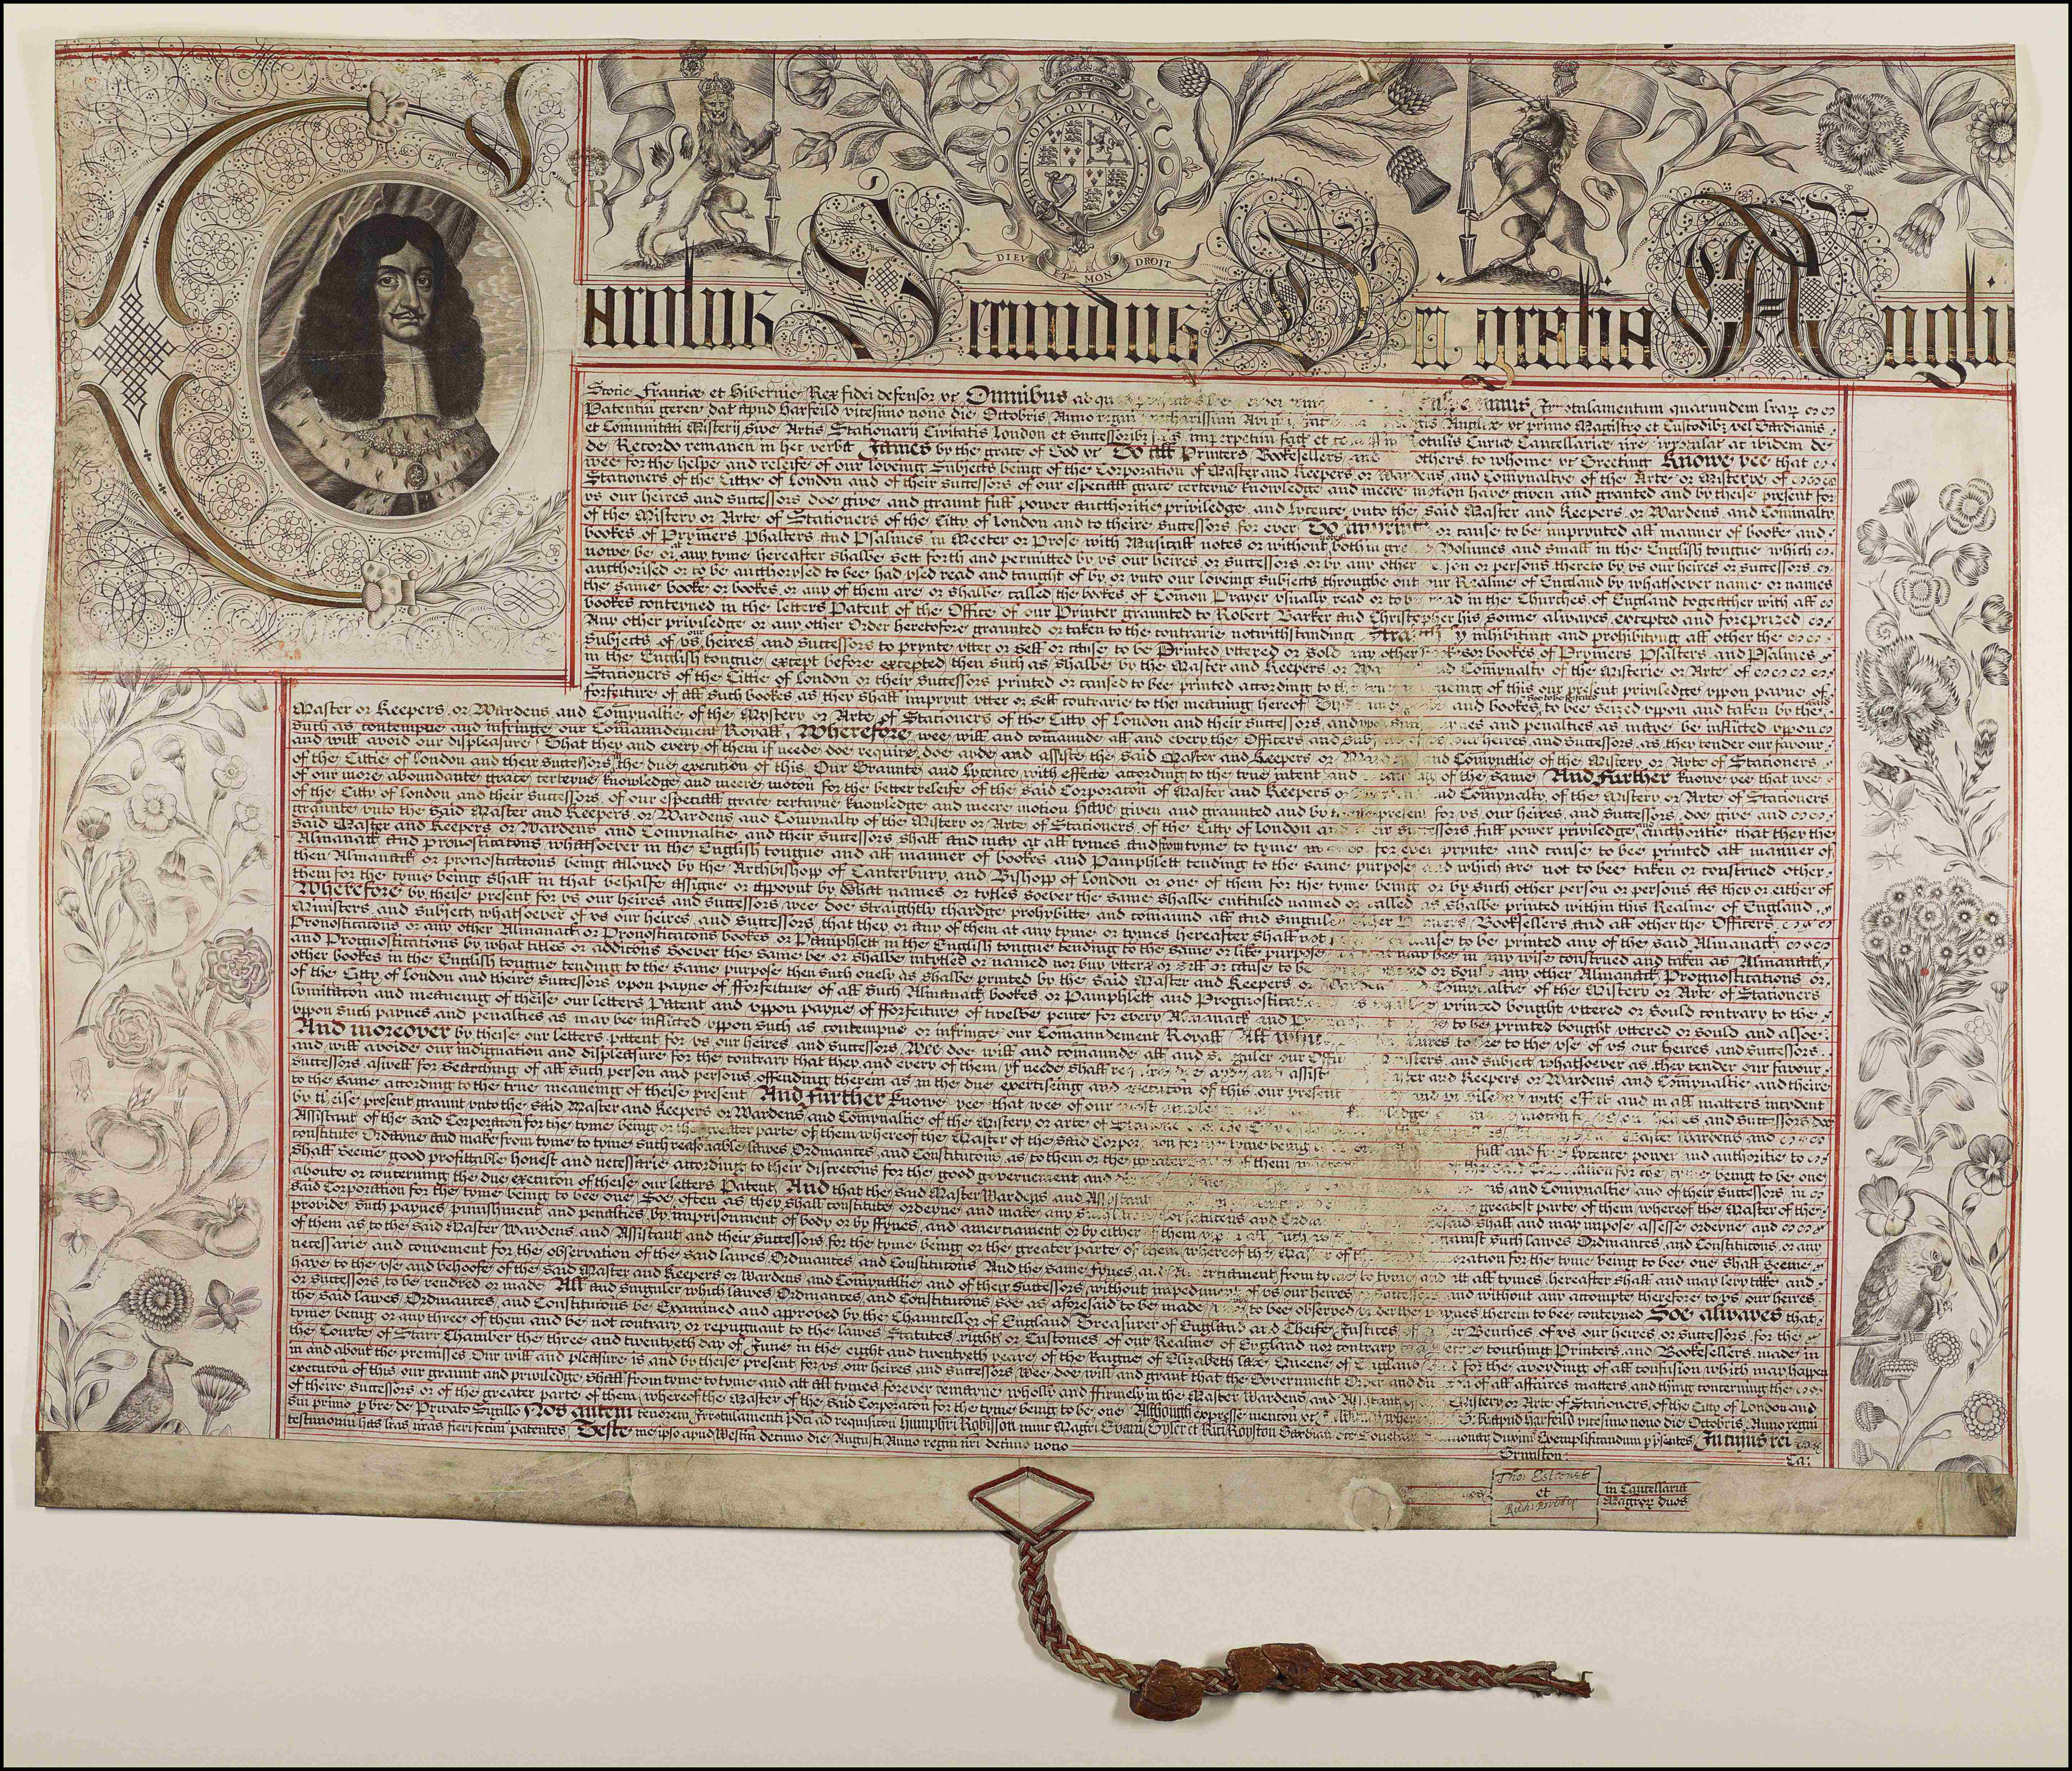 Inspeximus Exemplification of 10 August 1667 of English Stock Letters Patent of 29 October 1603